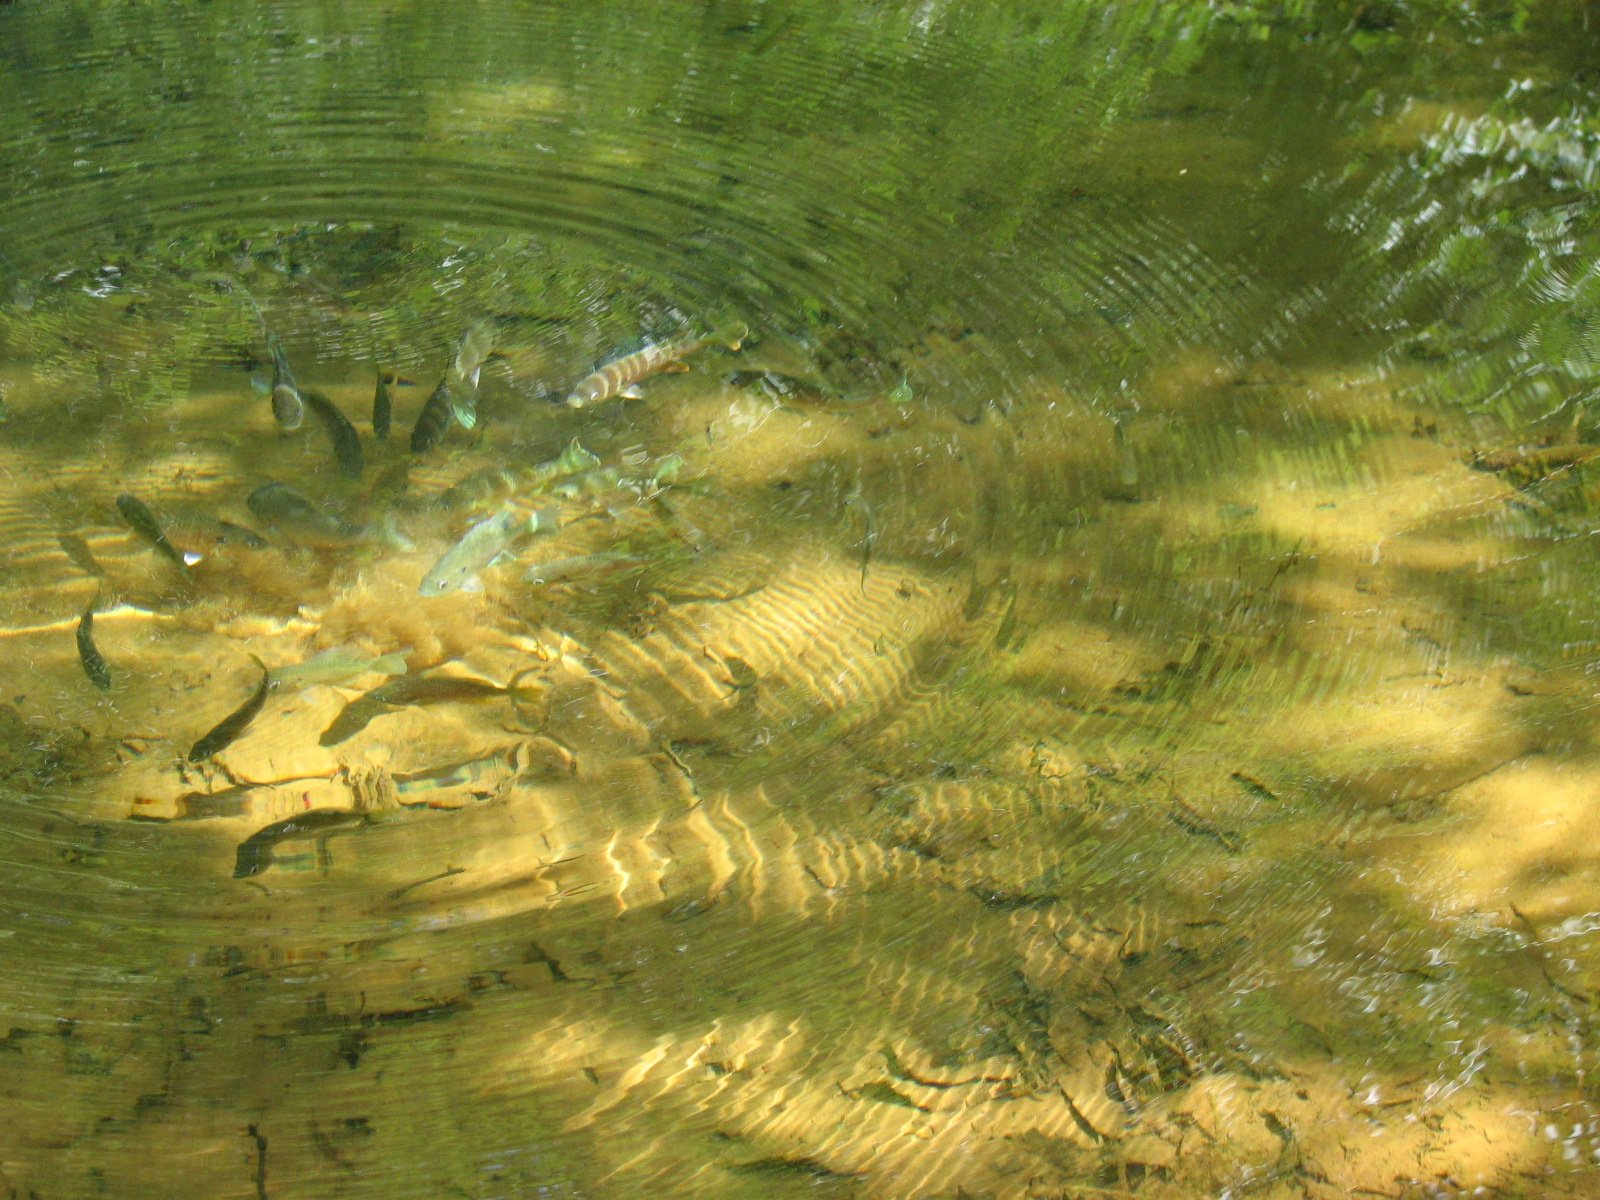 close up view of a pond's water surface